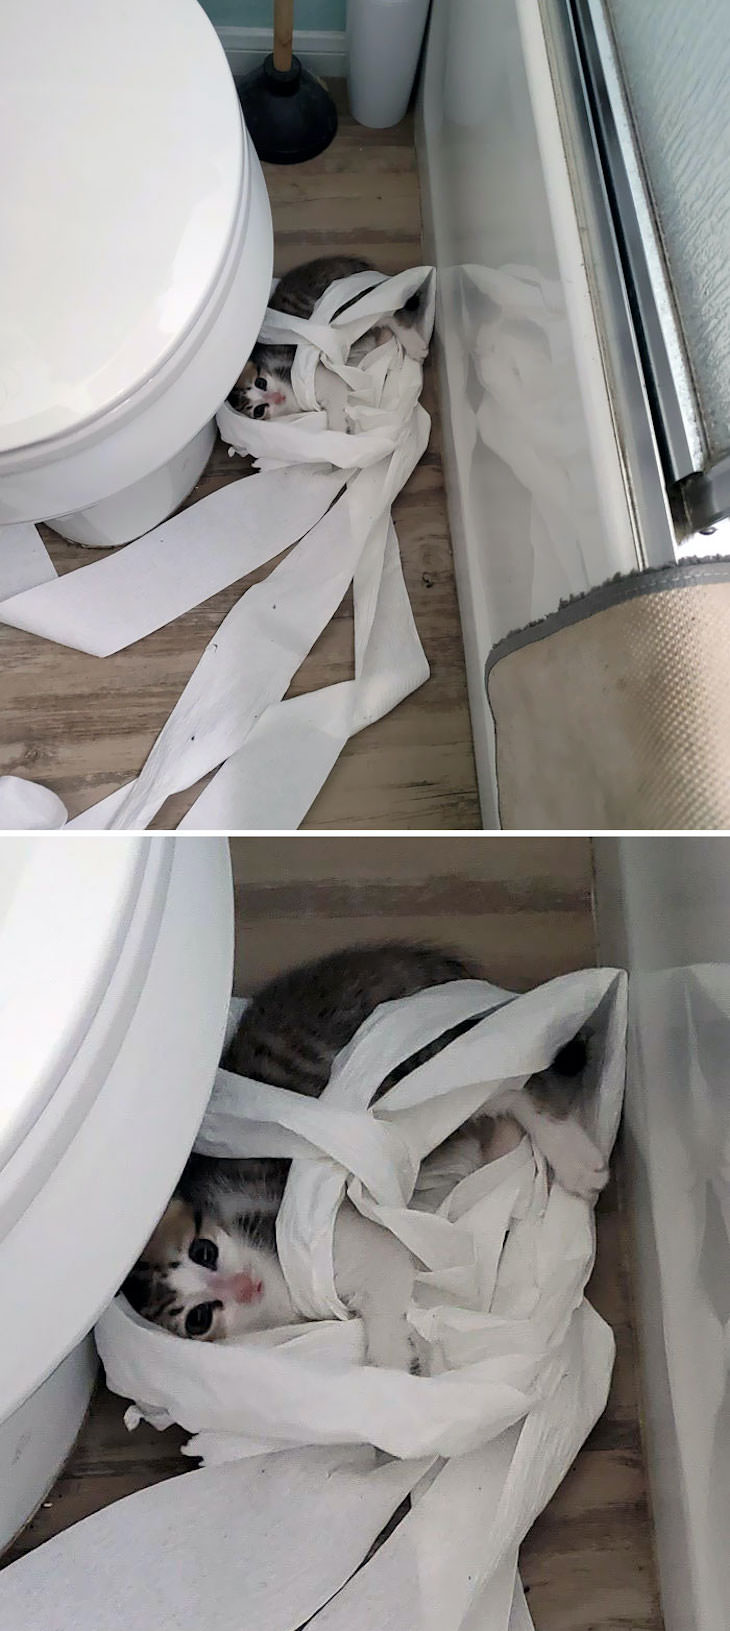 15 Times Cats Were Being Hilariously Mean, messing up the toilet paper